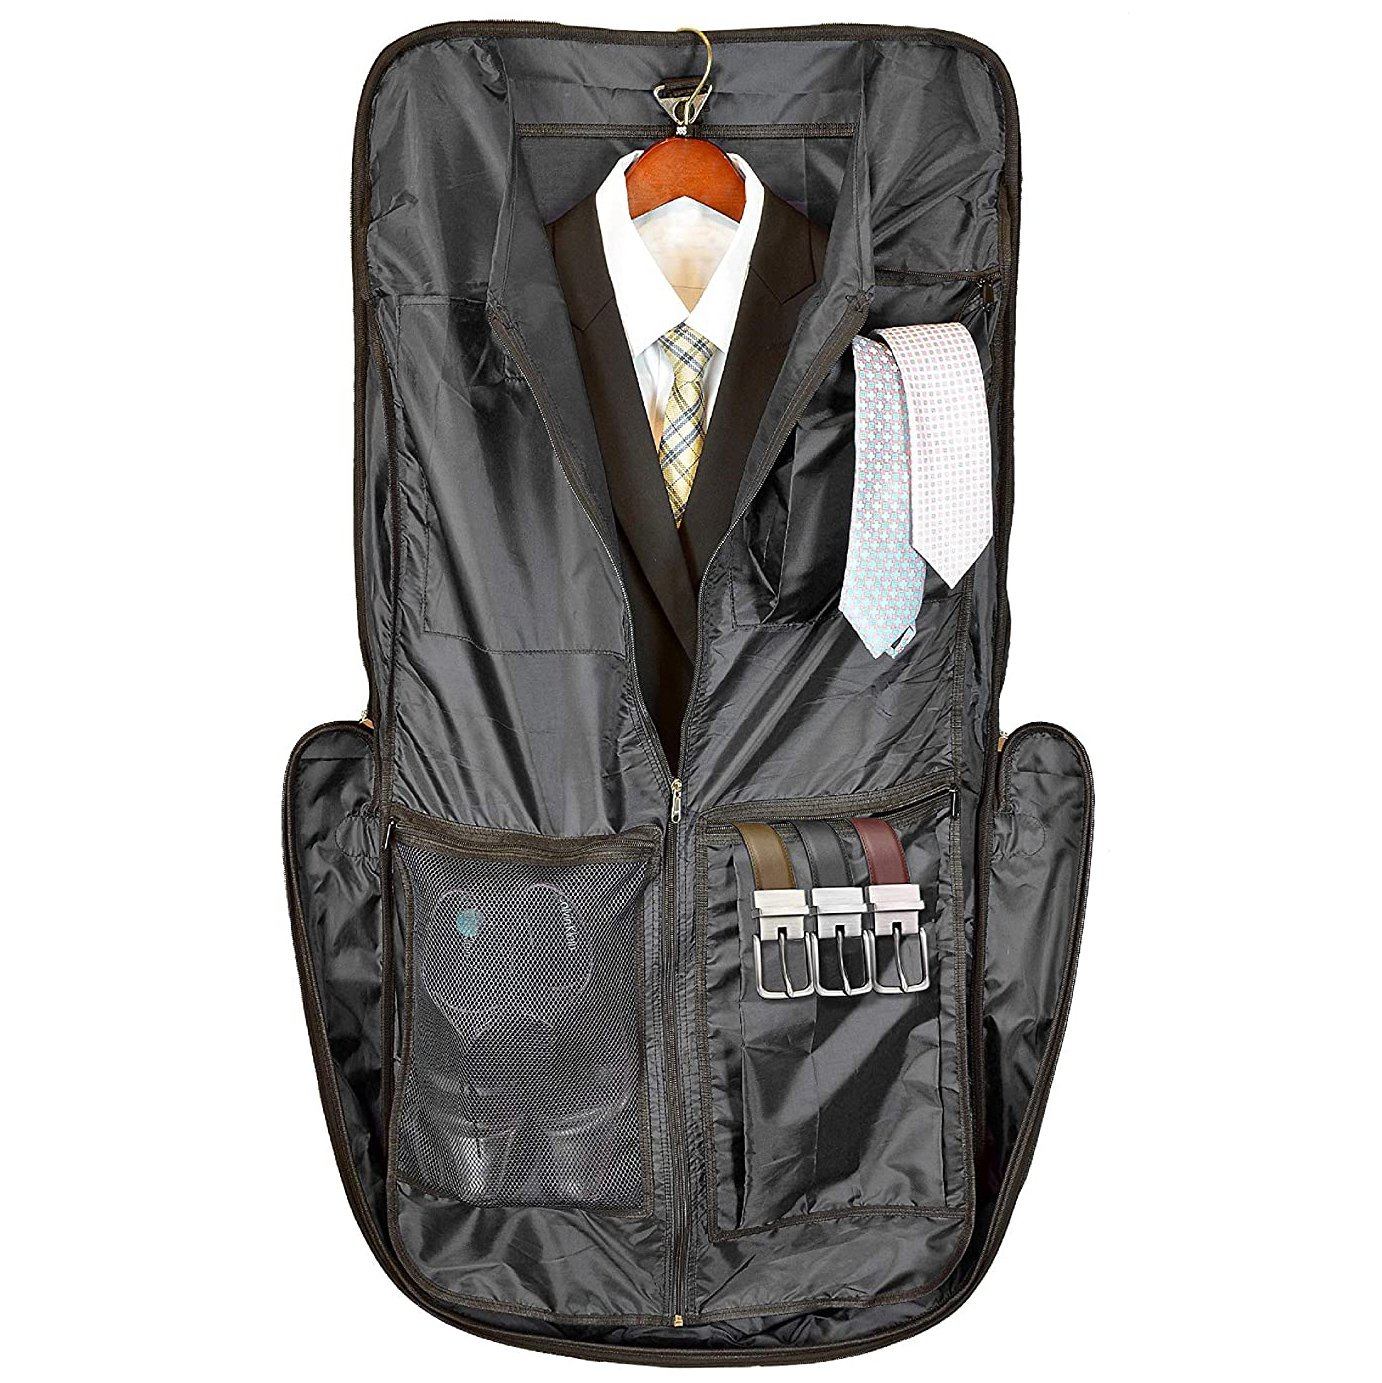 DailySale Bolford Travel Garment Bag For Business Trips And Travel With Padded Computer Pocket